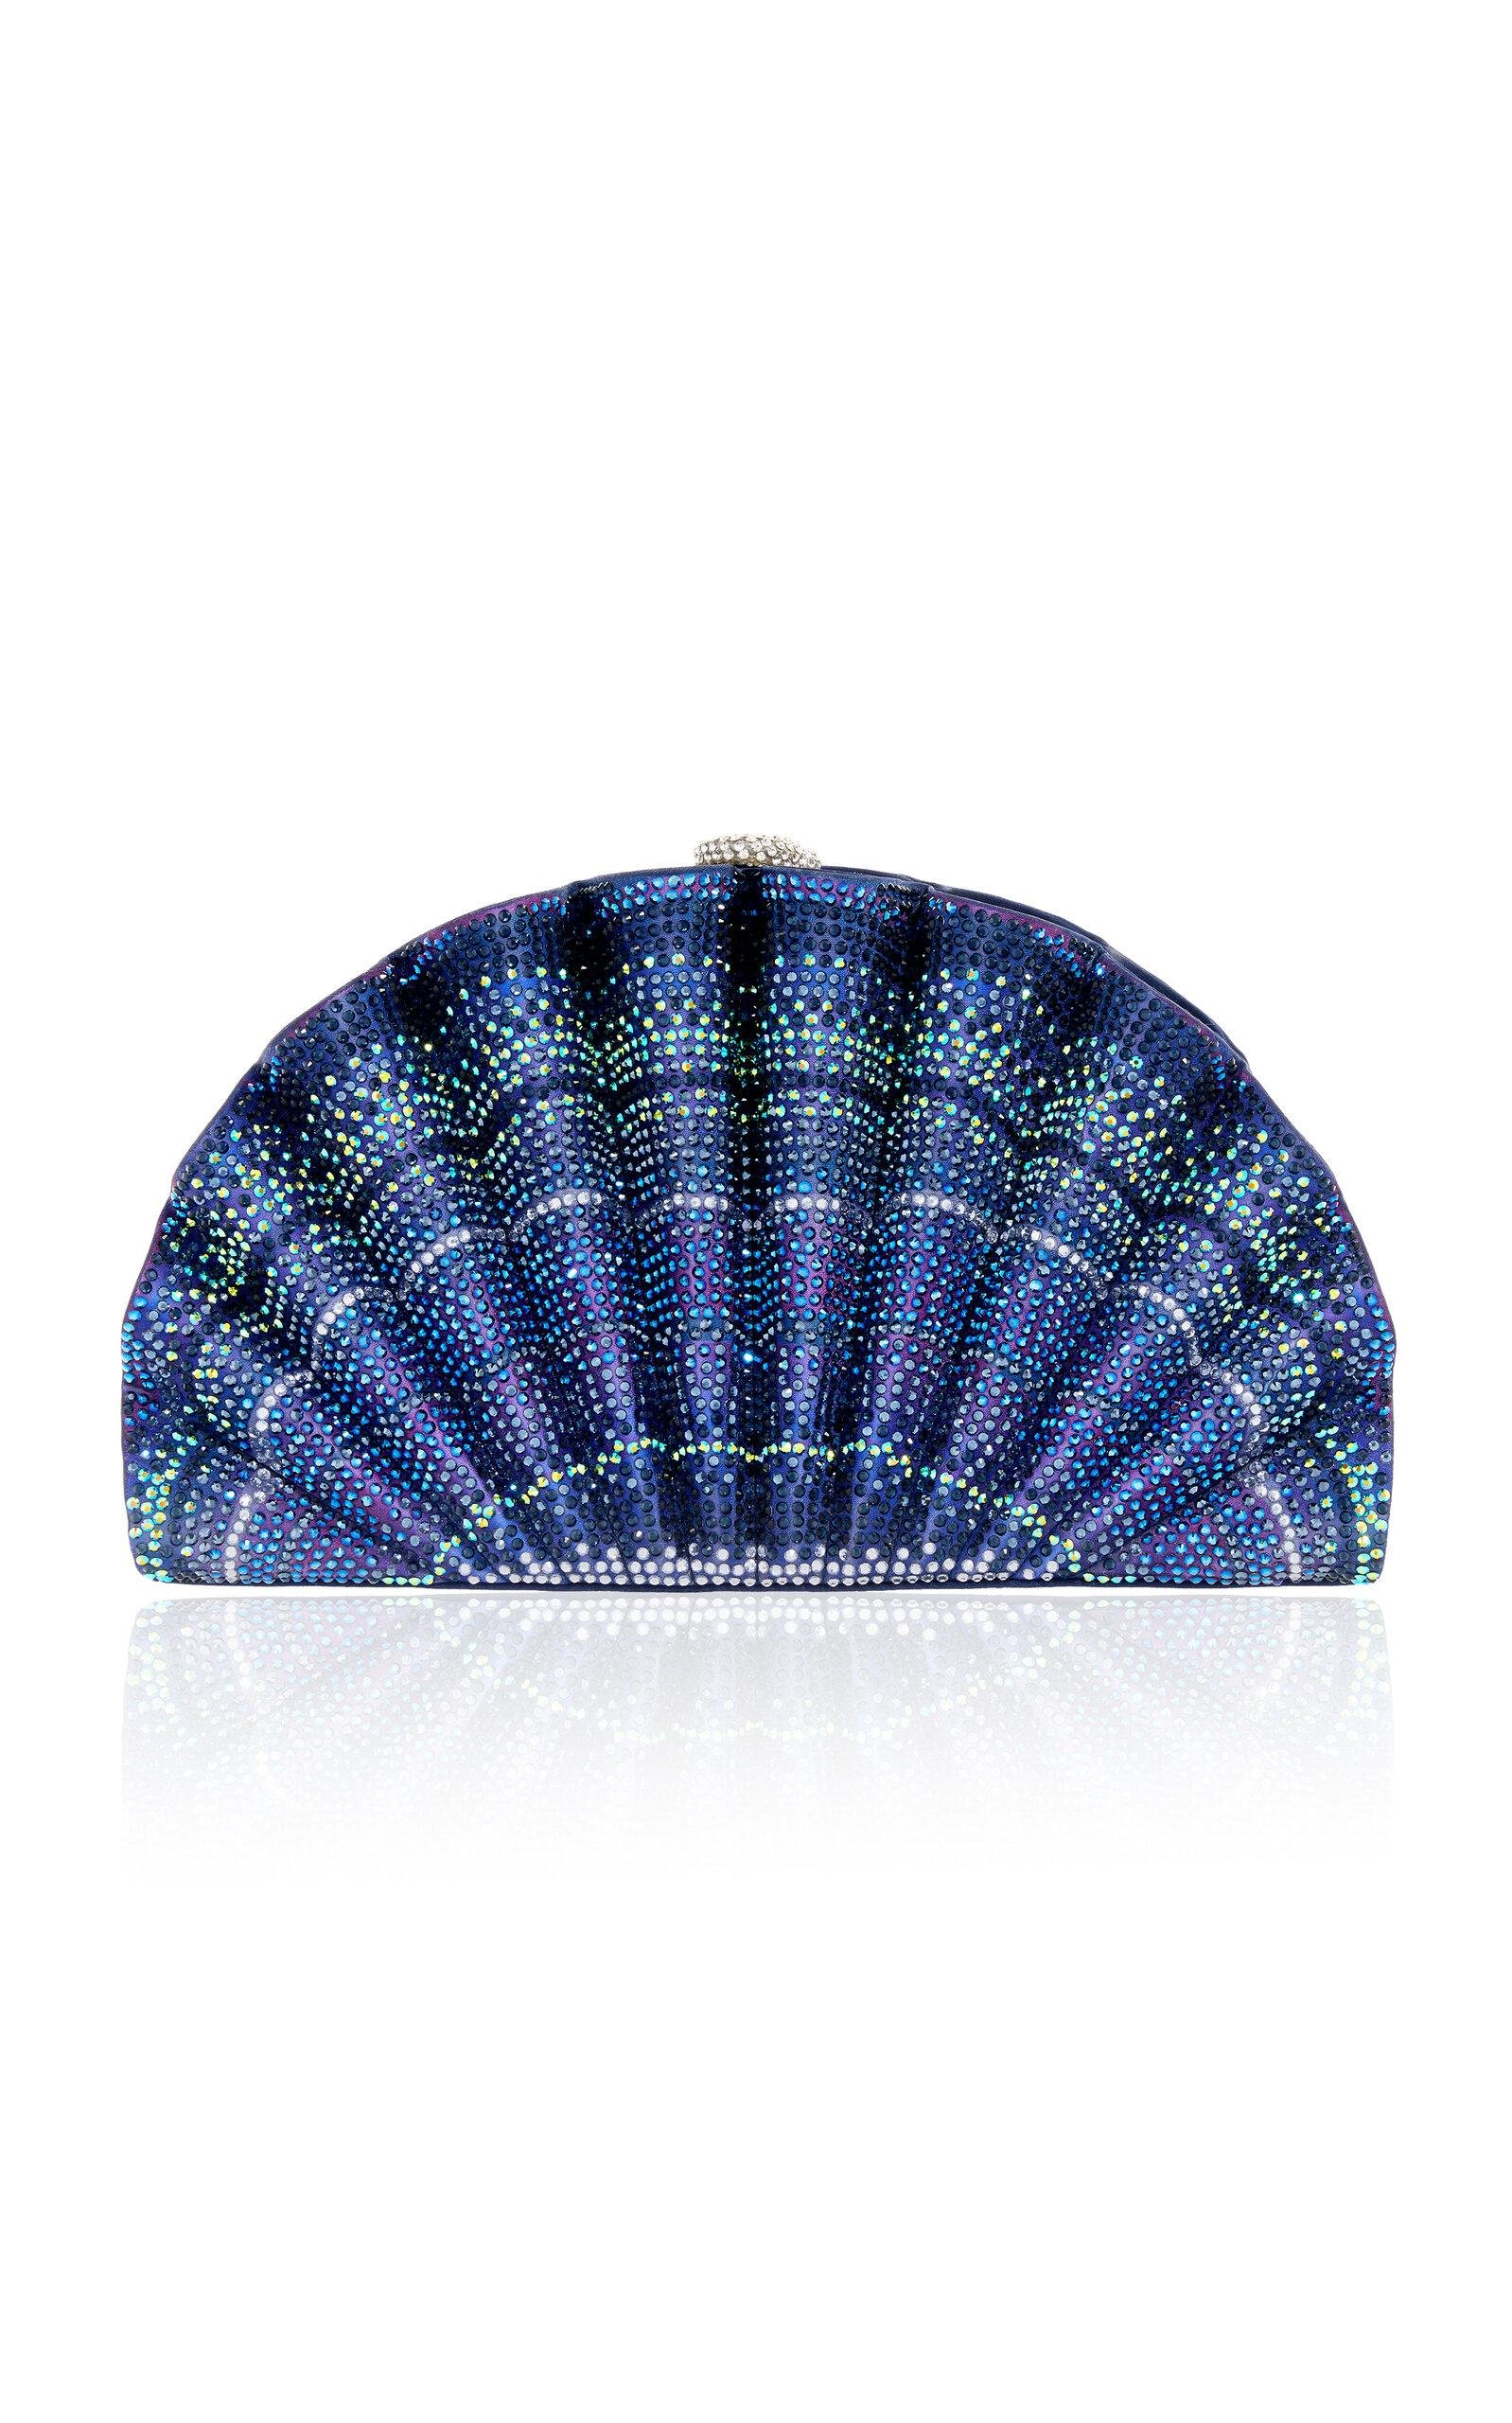 Judith Leiber Couture - Scallop Shell Origami Fan Crystal Clutch - Blue - OS - Only At Moda Operandi by JUDITH LEIBER COUTURE